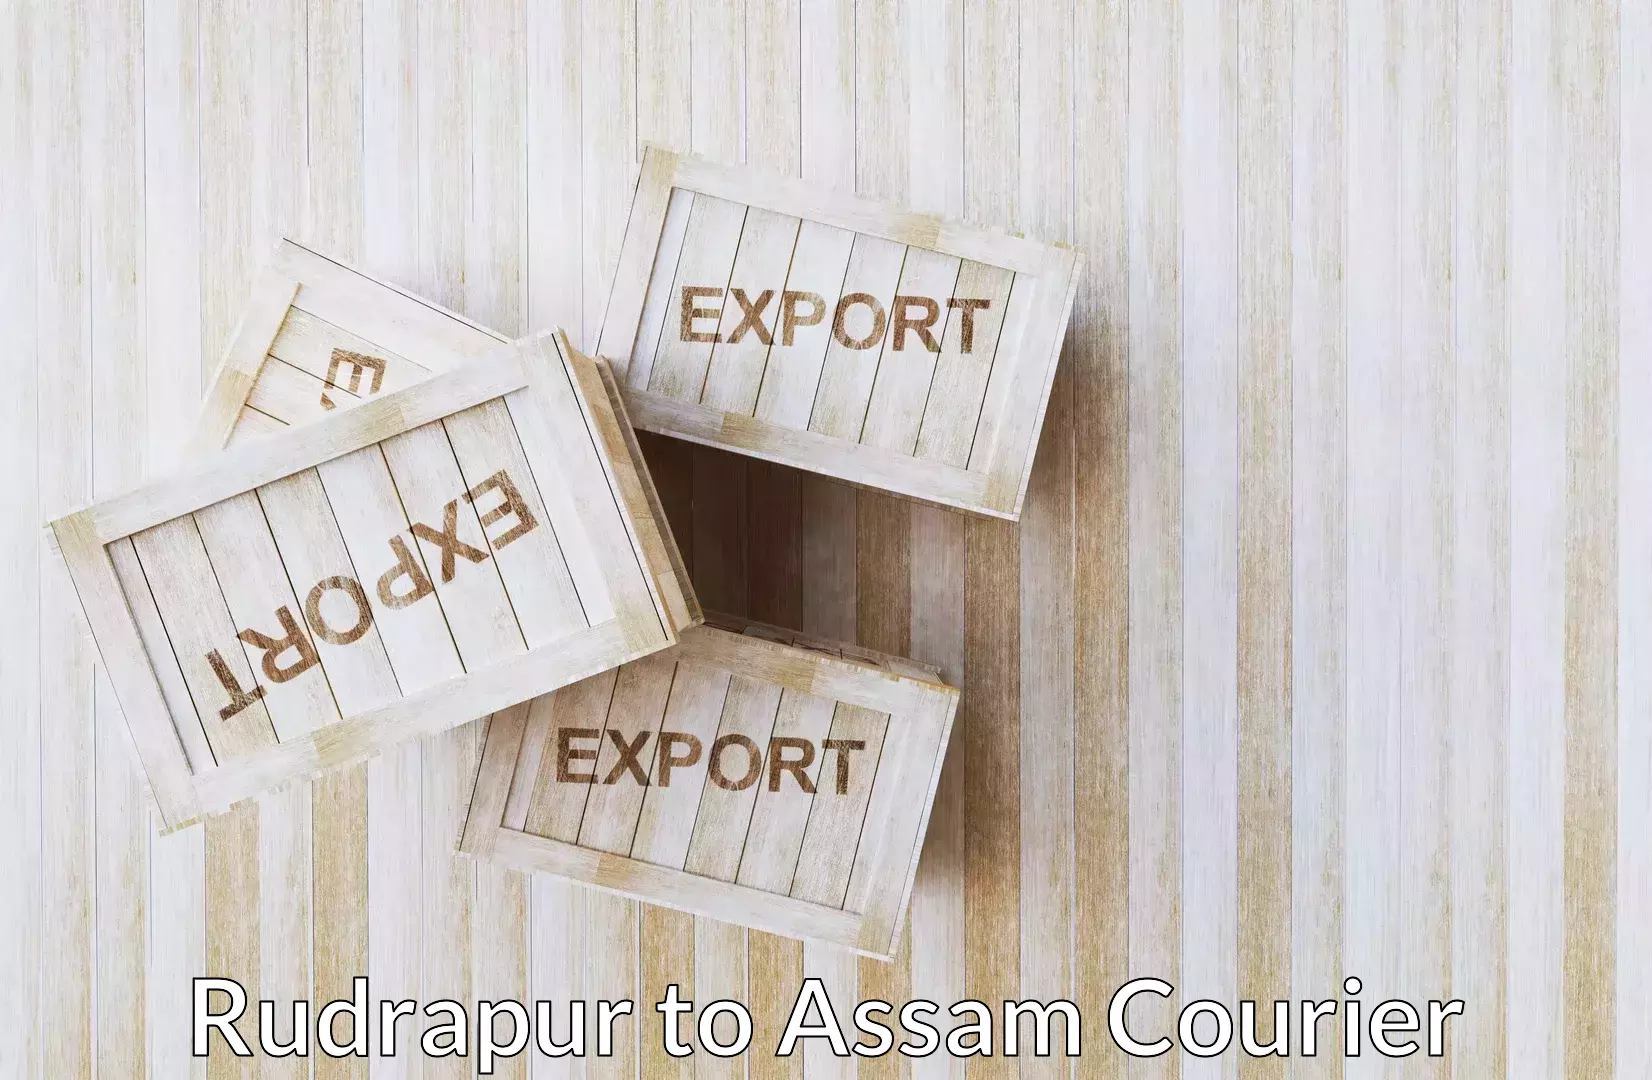 Luggage shipment strategy Rudrapur to Assam